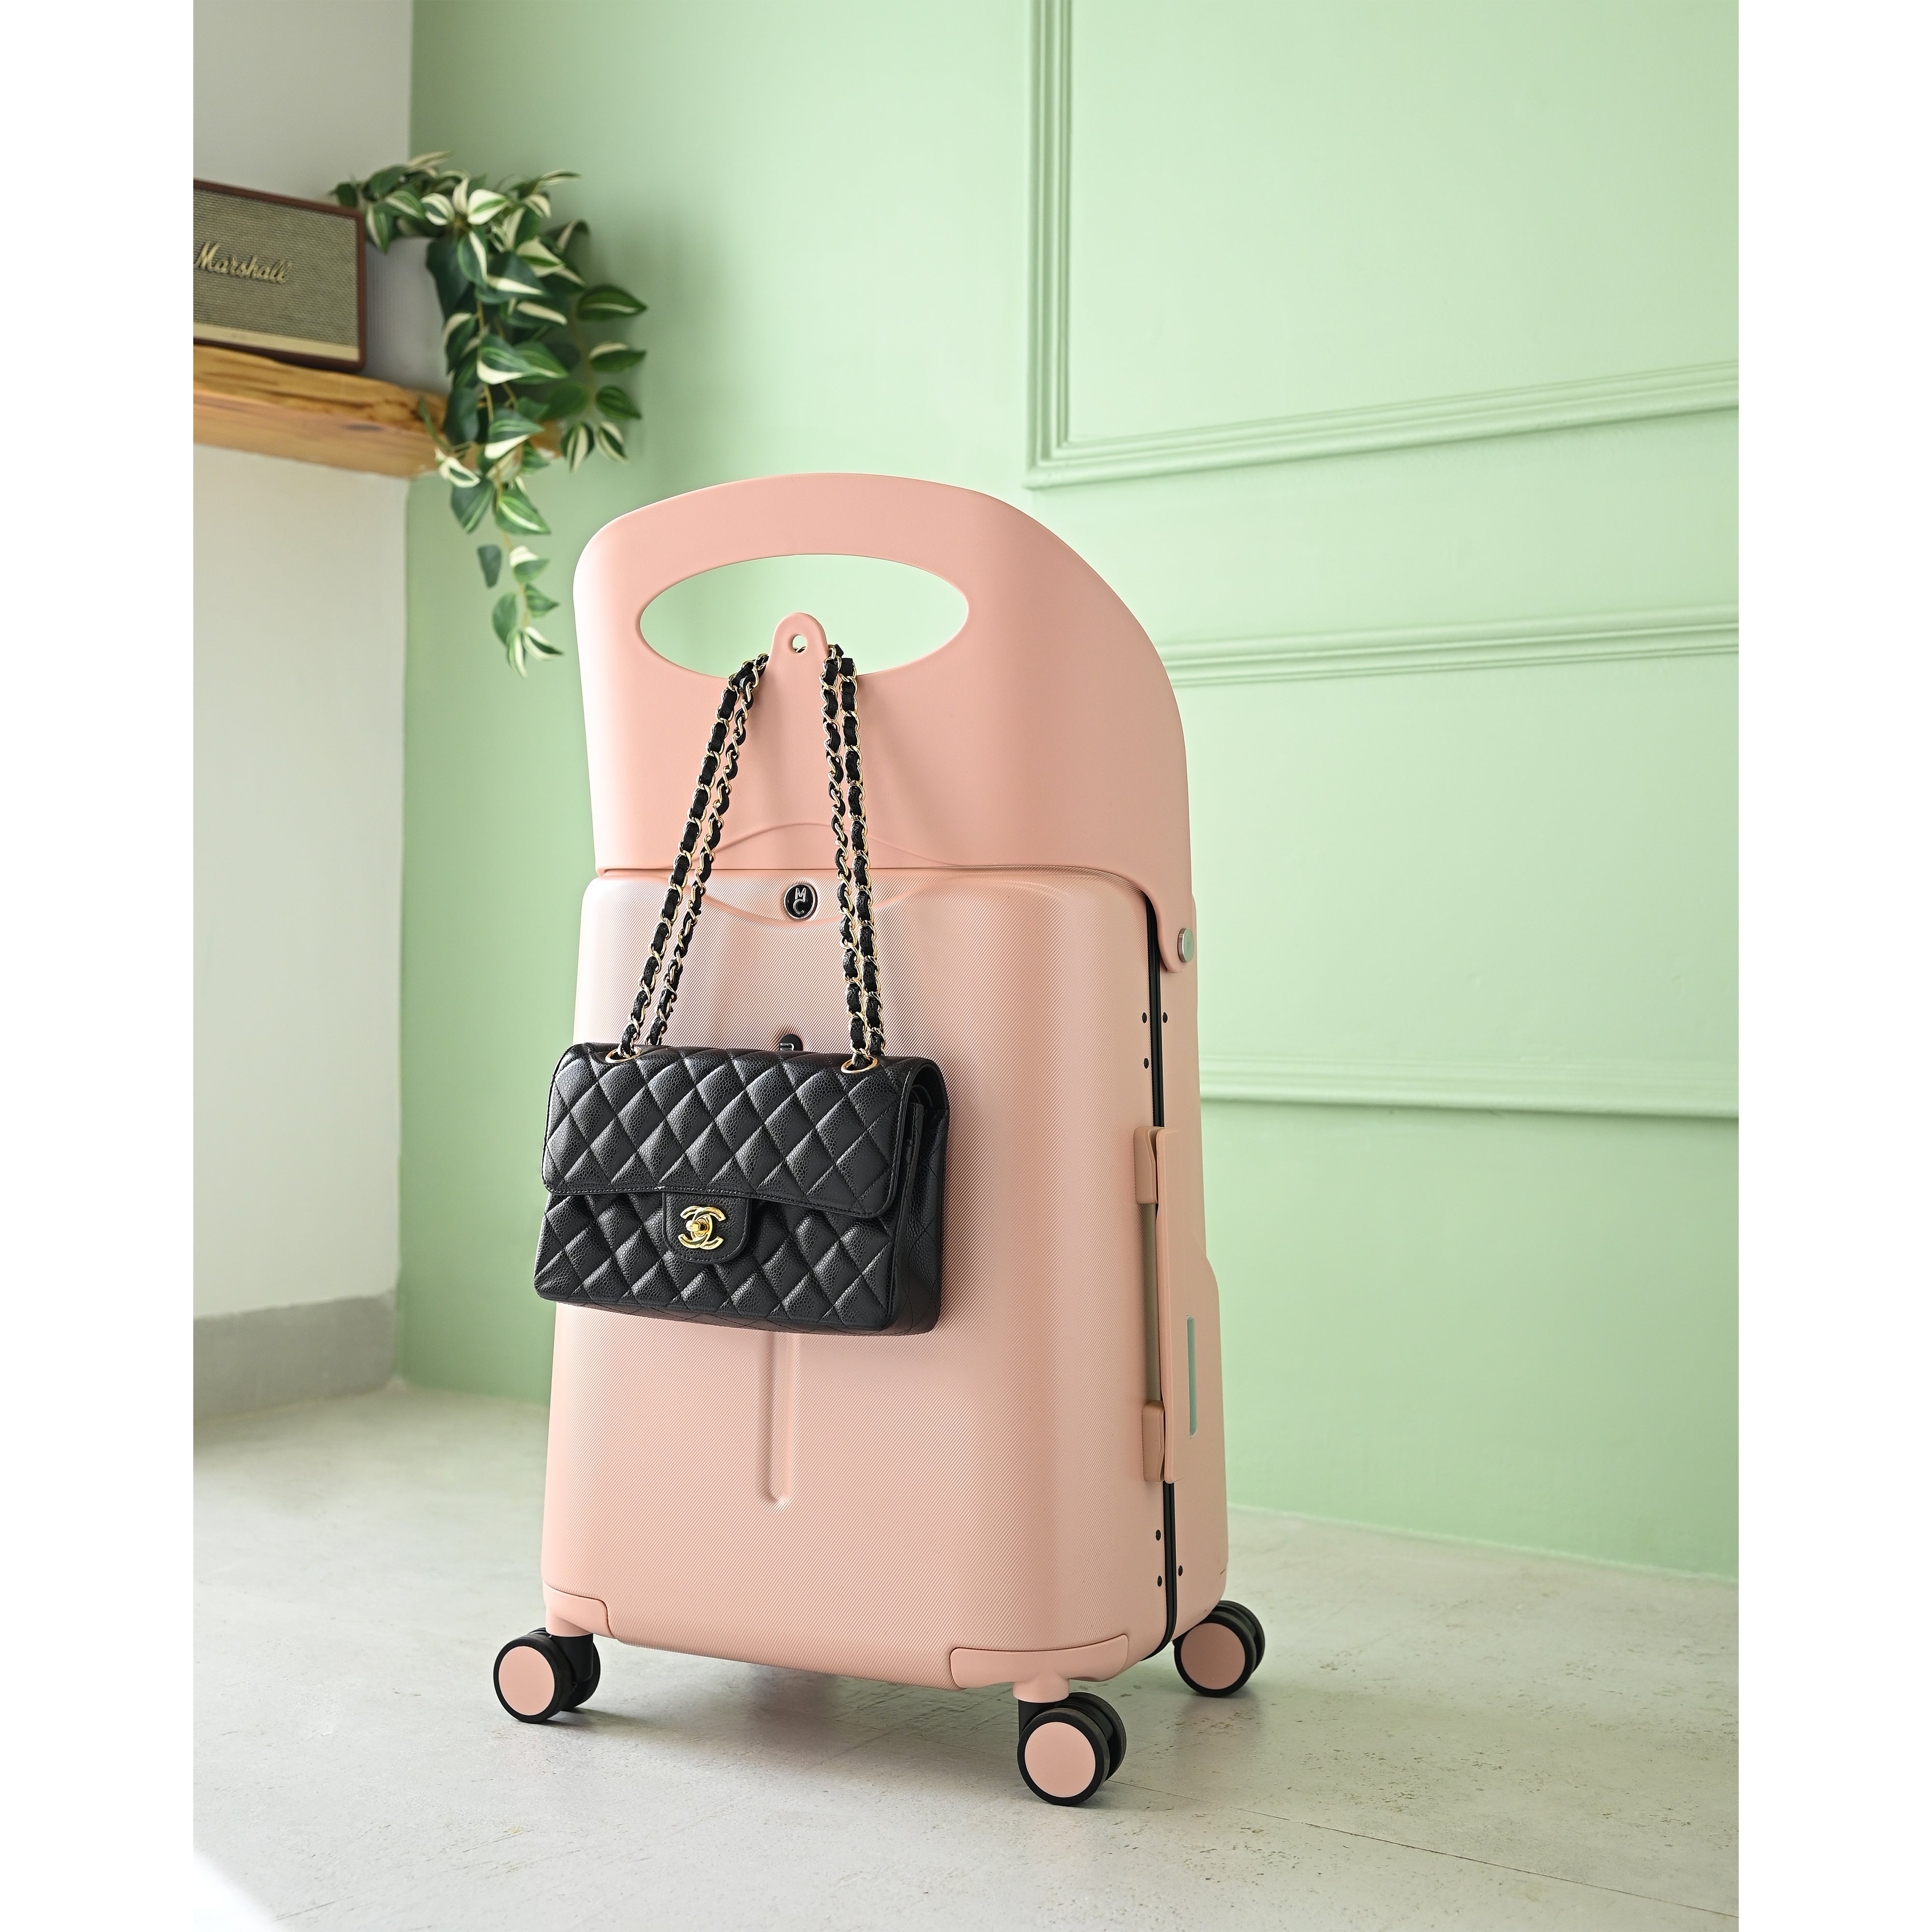 Miamily Dusty Pink Ride-On Trolley Carry-On Luggage 18 inches